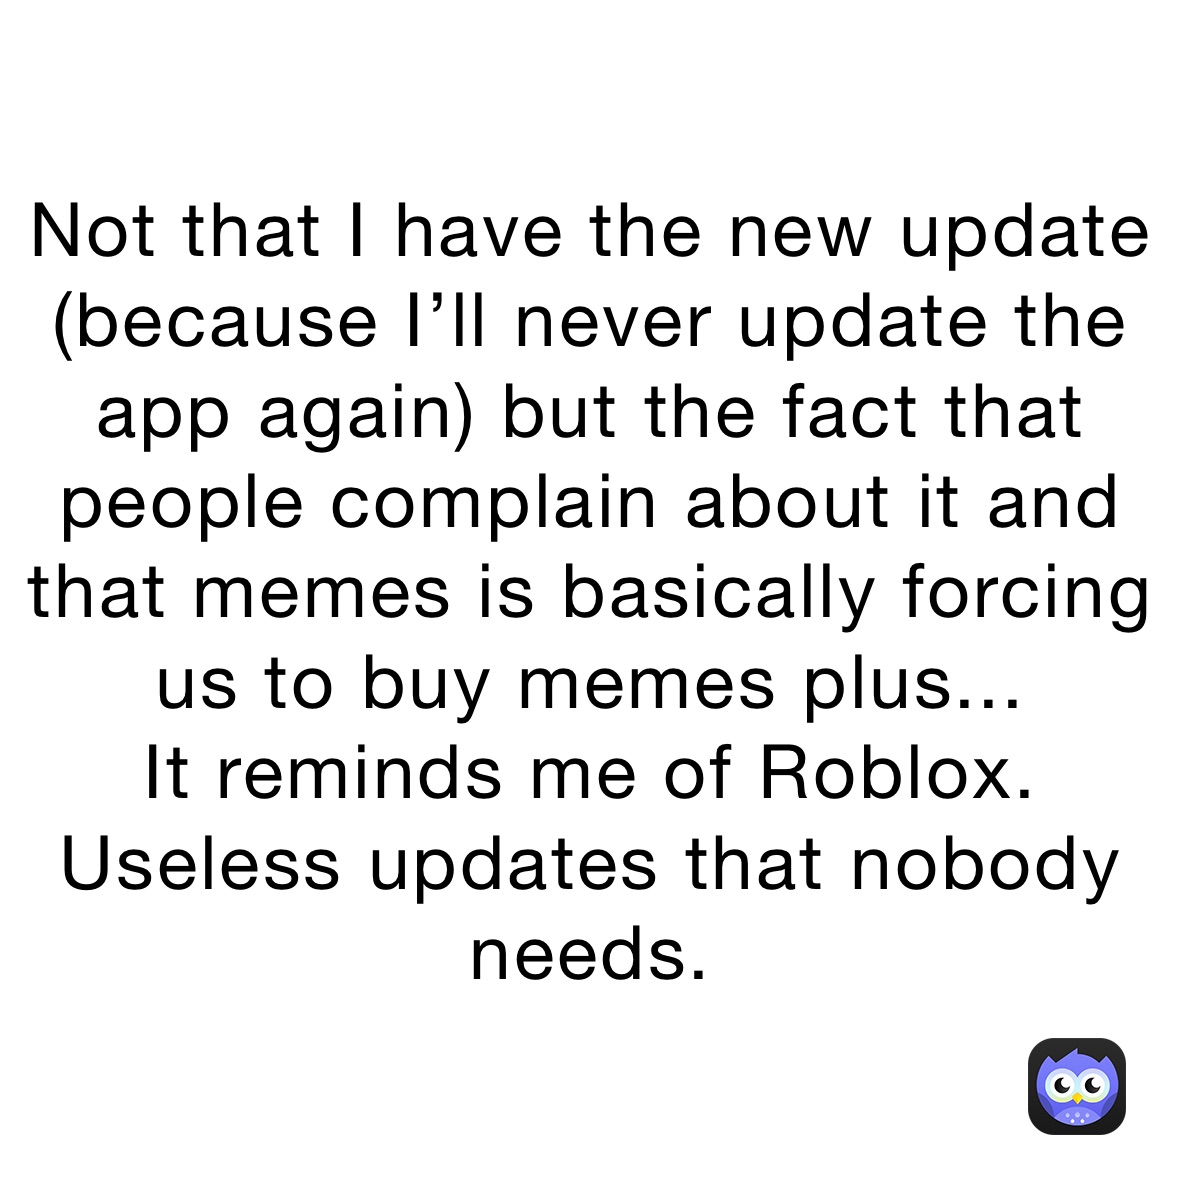 Not that I have the new update (because I’ll never update the app again) but the fact that people complain about it and that memes is basically forcing us to buy memes plus...
It reminds me of Roblox. Useless updates that nobody needs.